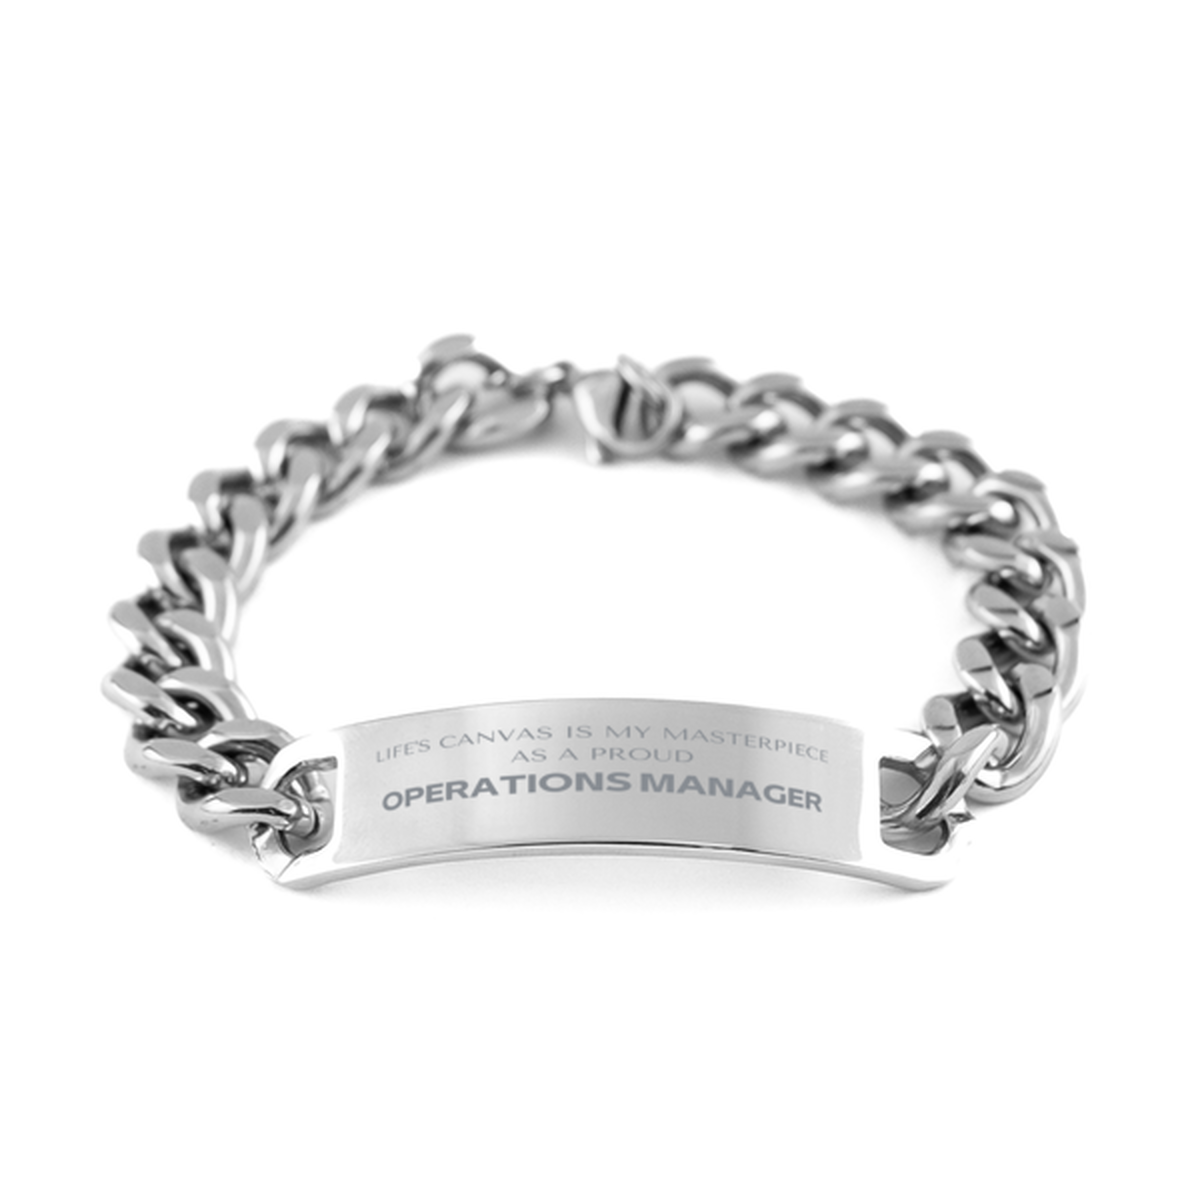 Proud Operations Manager Gifts, Life's canvas is my masterpiece, Epic Birthday Christmas Unique Cuban Chain Stainless Steel Bracelet For Operations Manager, Coworkers, Men, Women, Friends